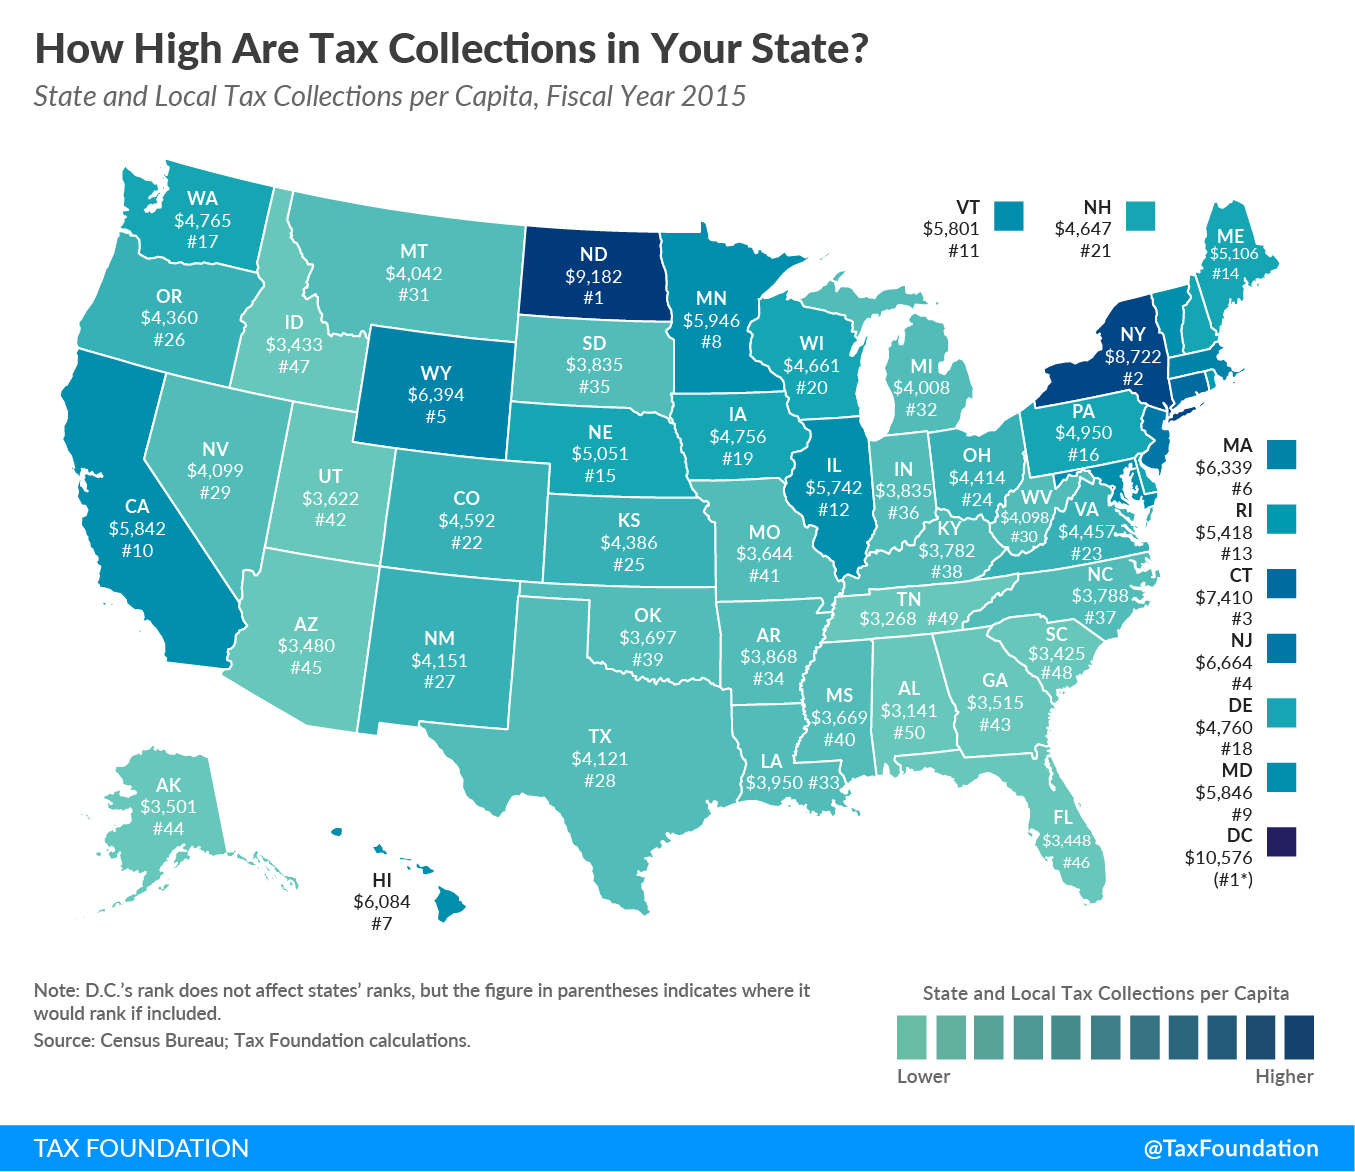 How High Are State and Local Tax Collections in Your State?